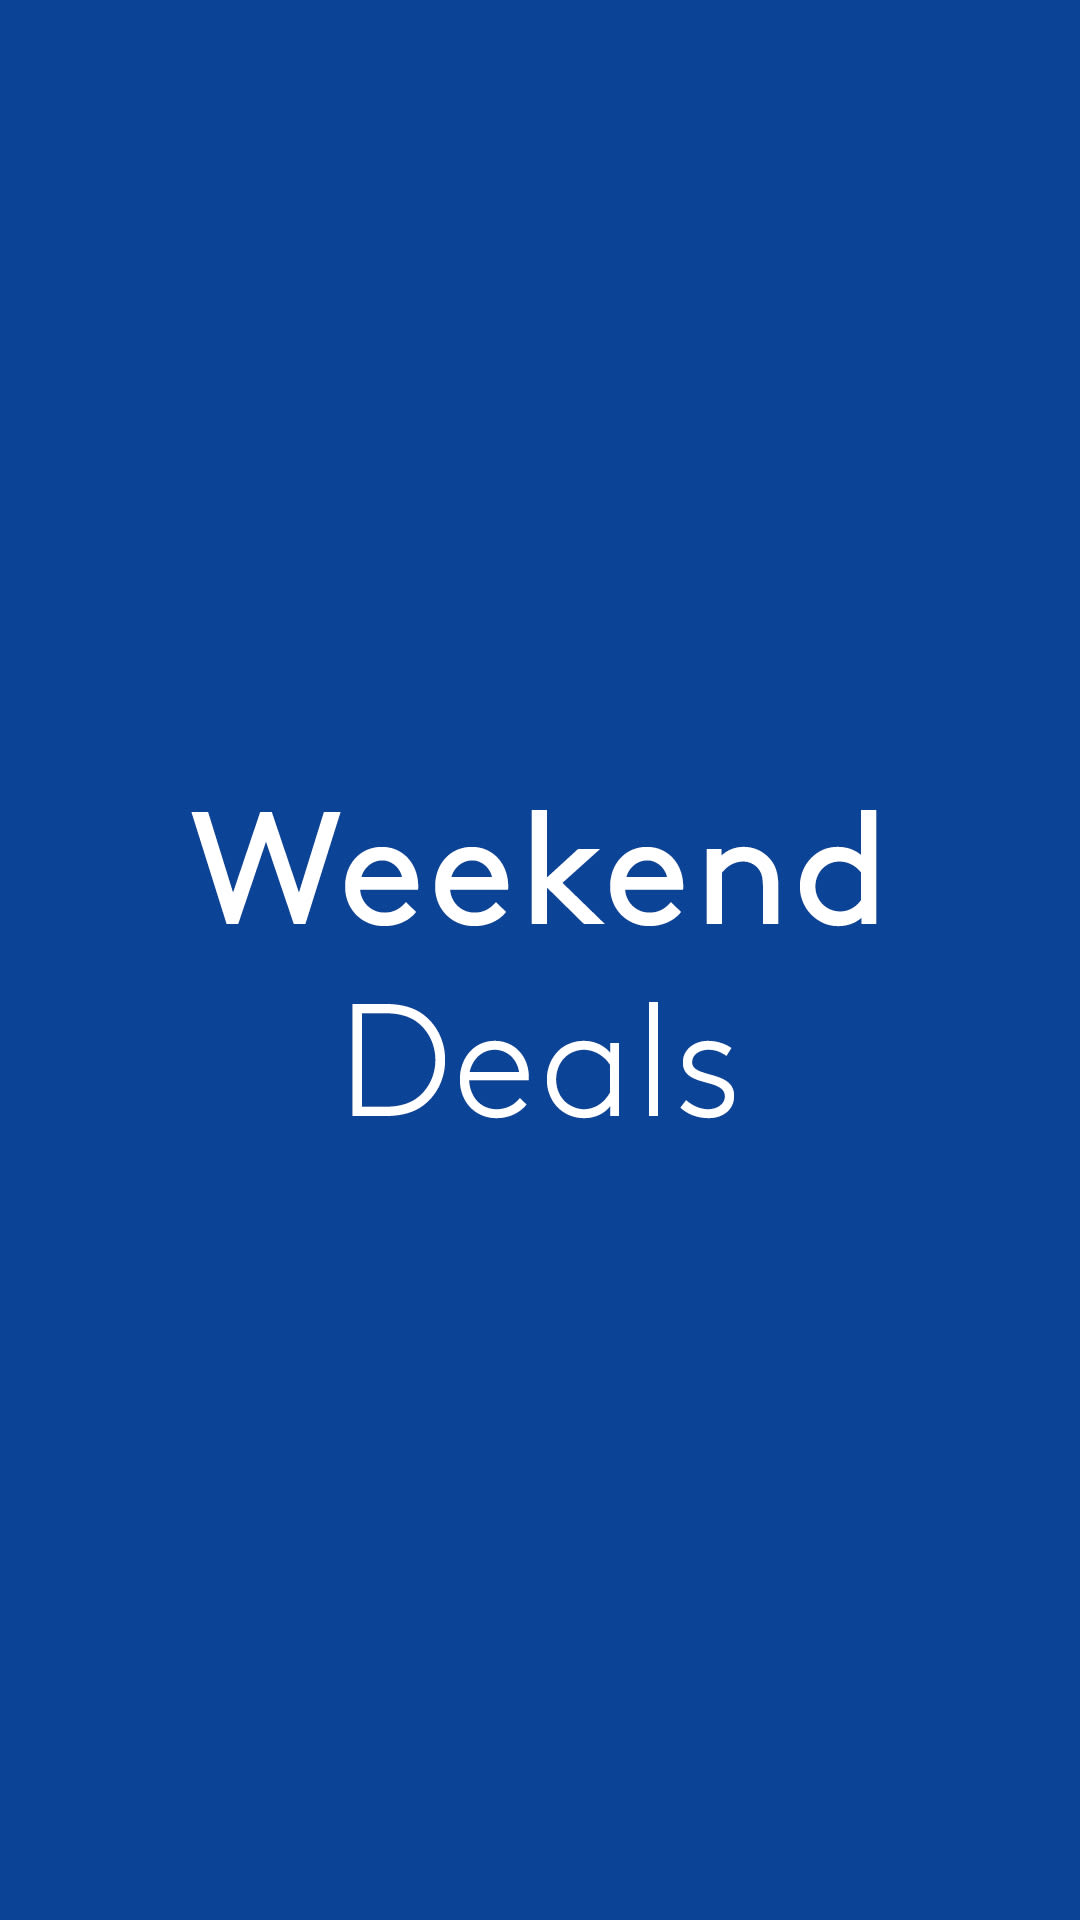 Don't miss our weekend deals